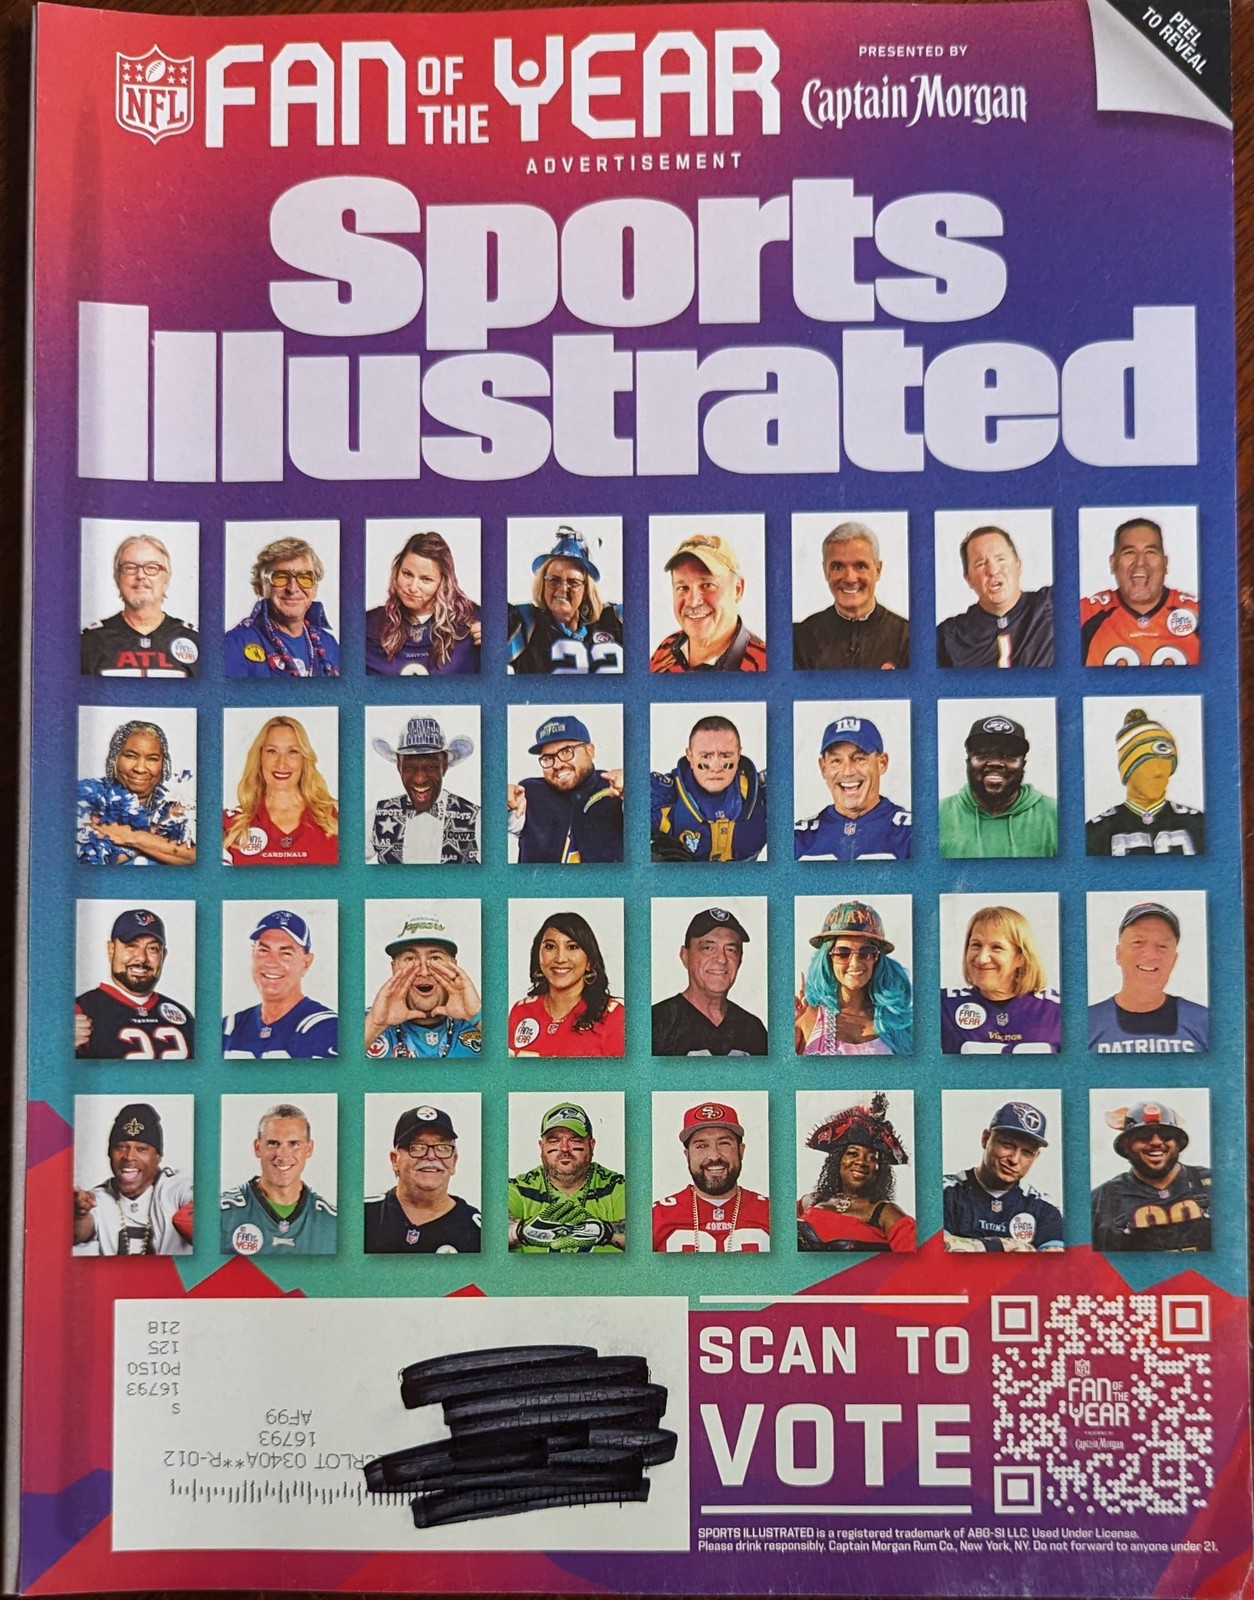 Primary image for Captain Morgan NFL Fan of the Year @ Sports Illustrated Issue Feb 2023